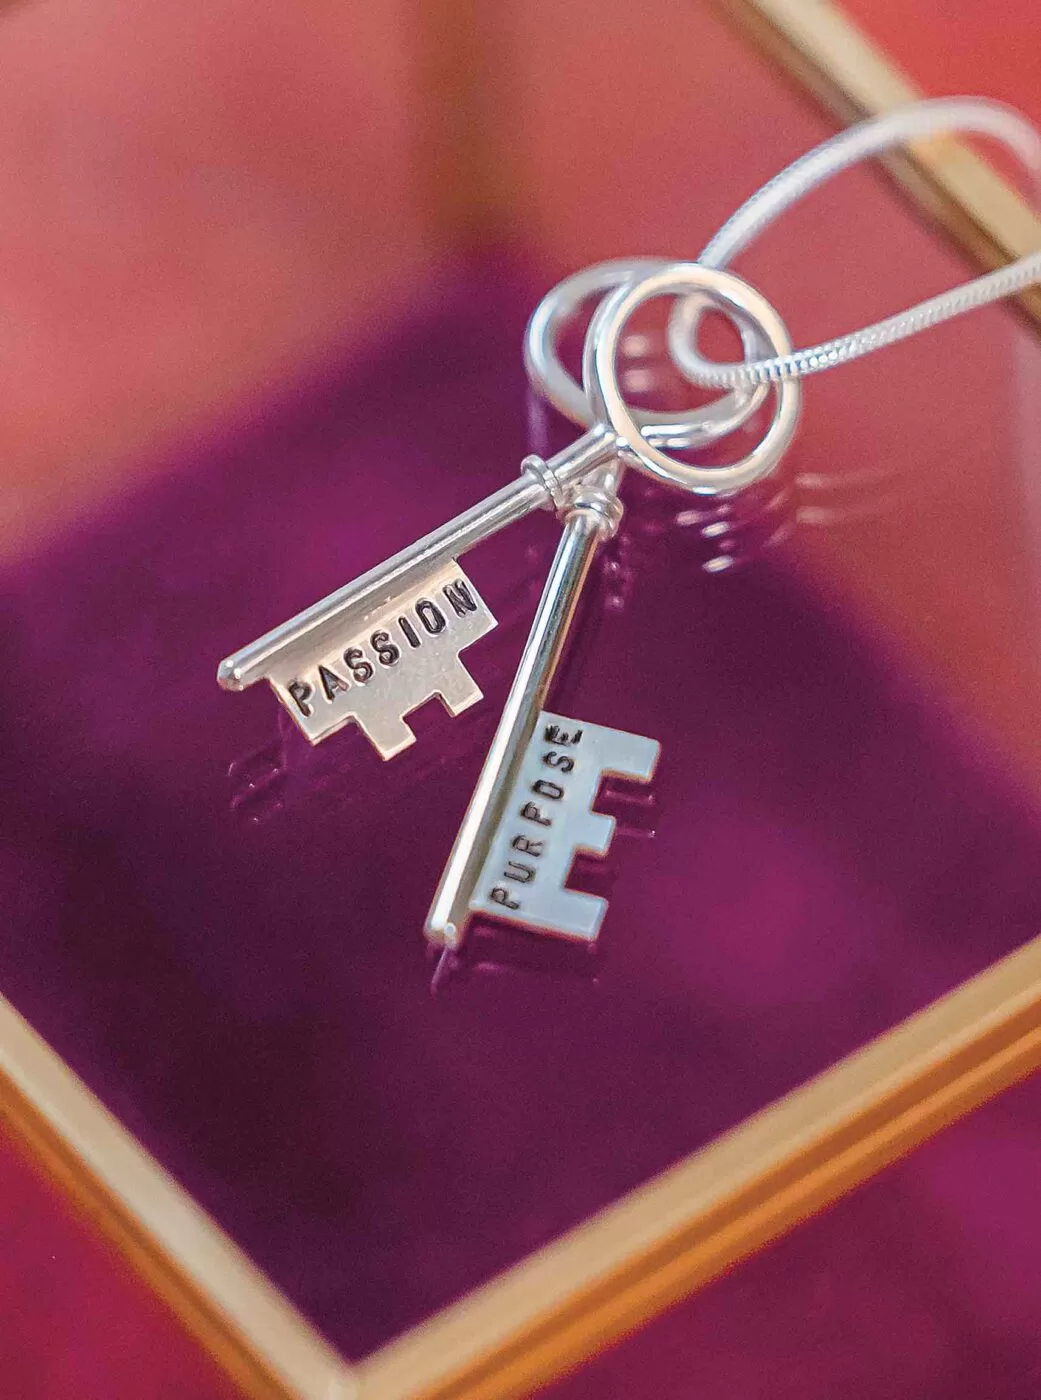 Passion and Purpose Keys on a necklace.